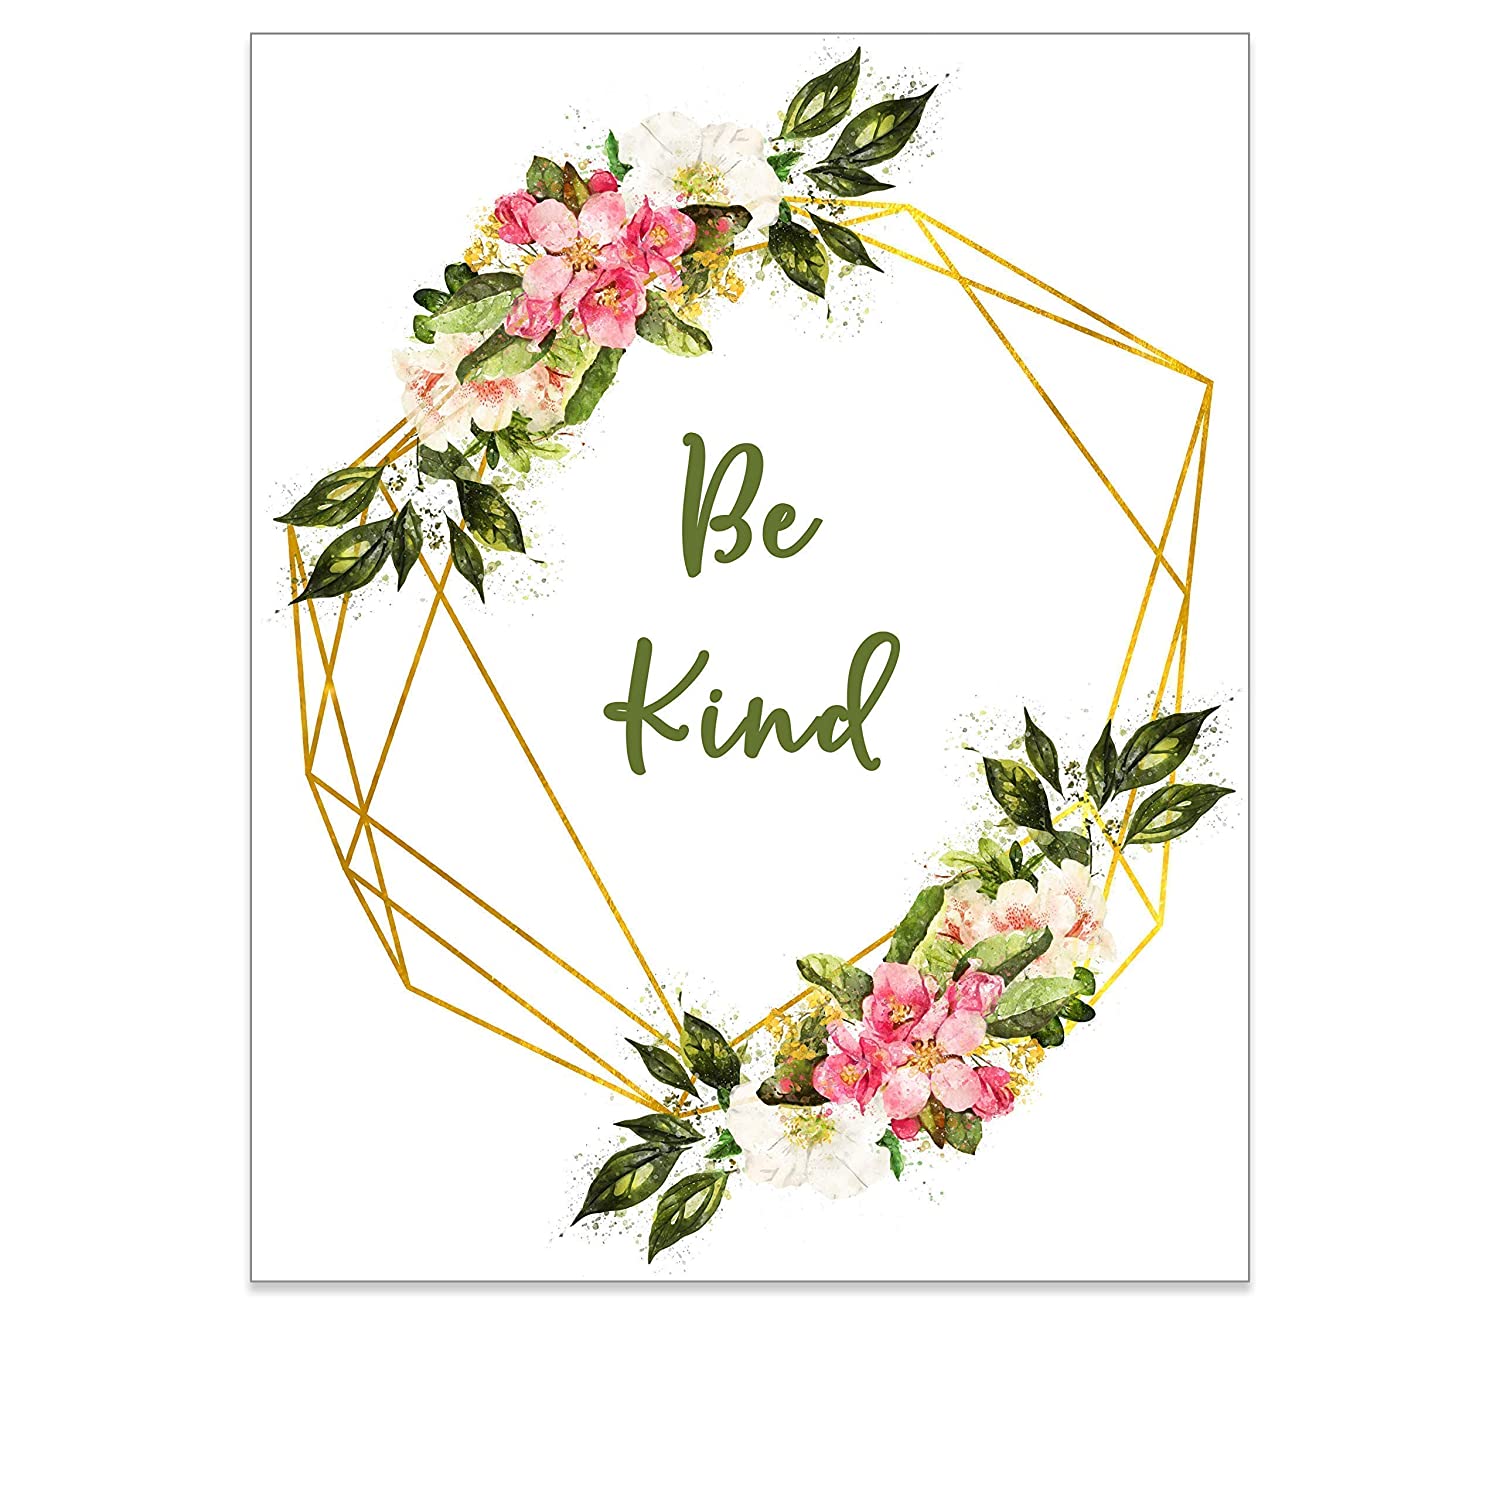 Strong Girl Print Kind Poster Kindness Boho Bedroom Picture Quote Wall Art for Teens Farmhouse Nursery Wall Decor Room Flower Artwork